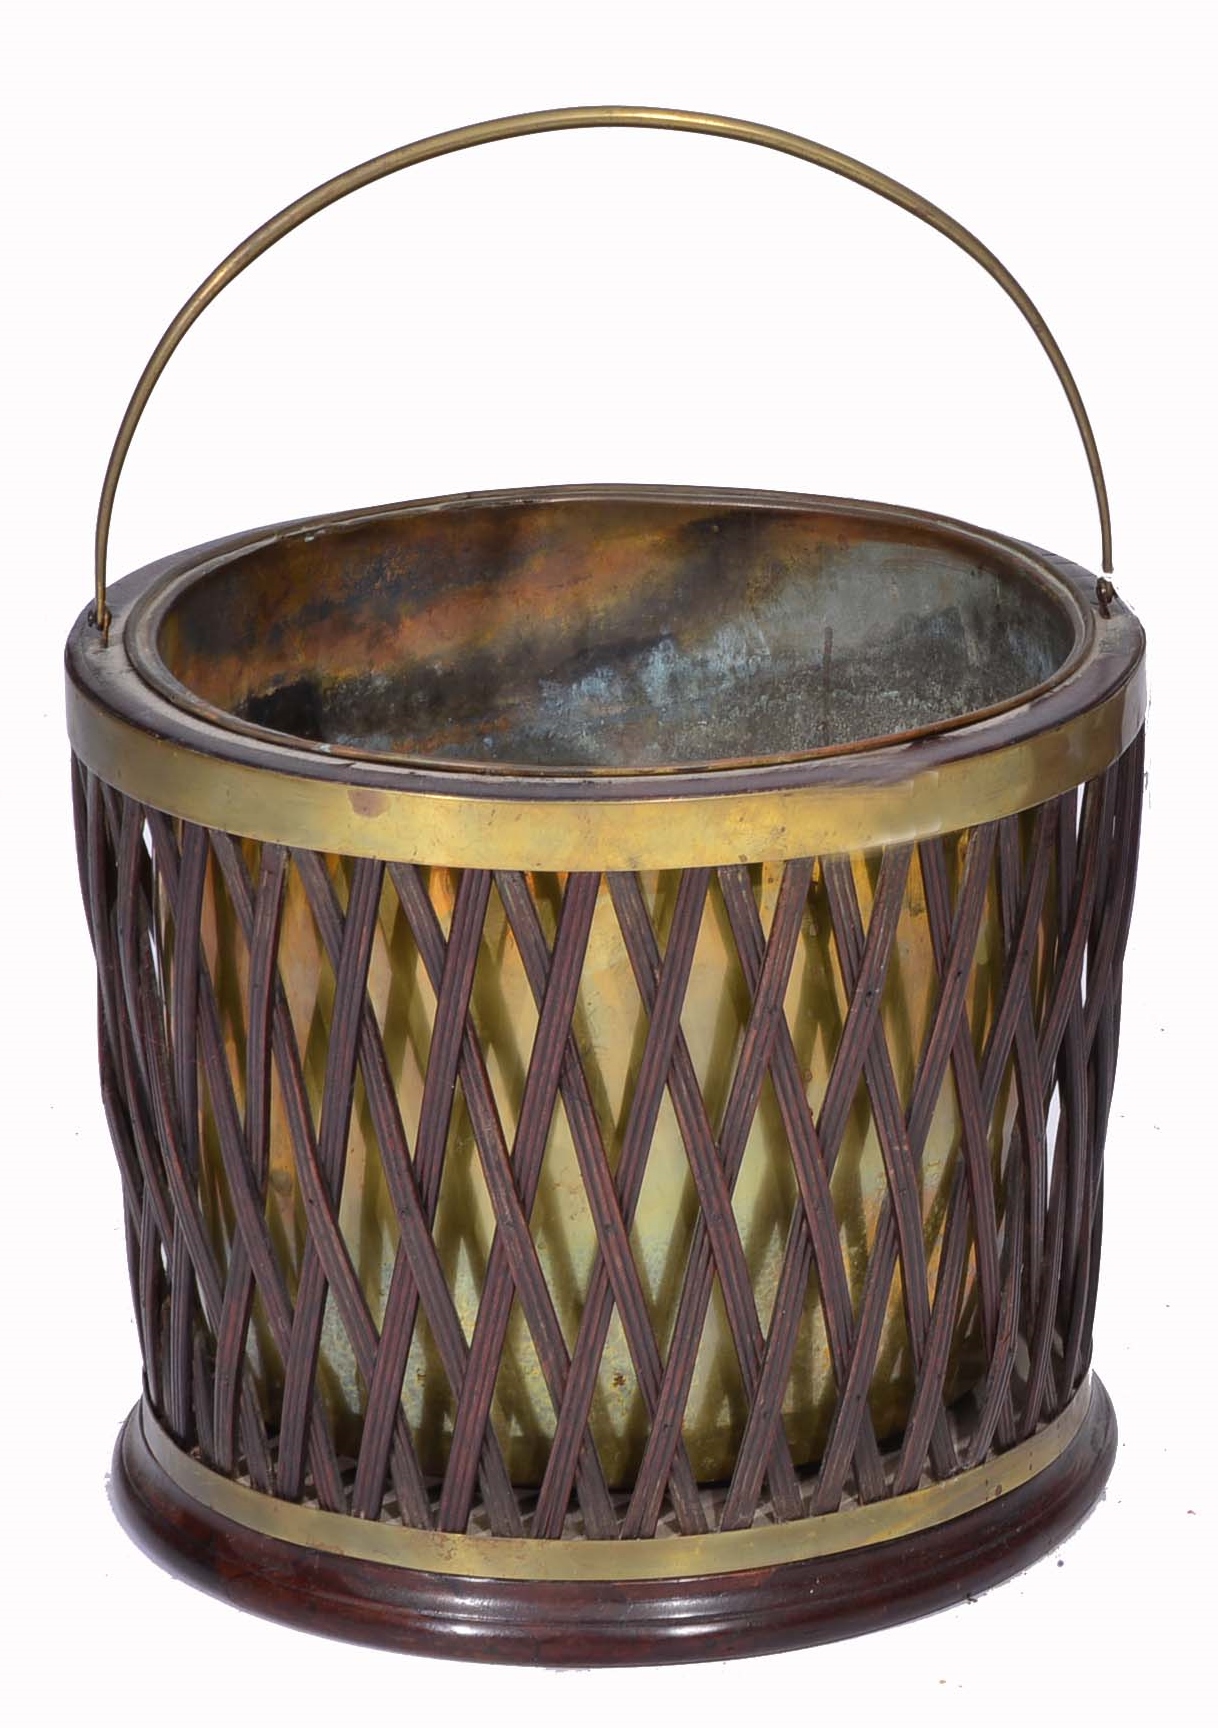 A GEORGE III MAHOGANY BRASS BOUND BUCKET with cross lattice sides and inner liner 31cm diameter x